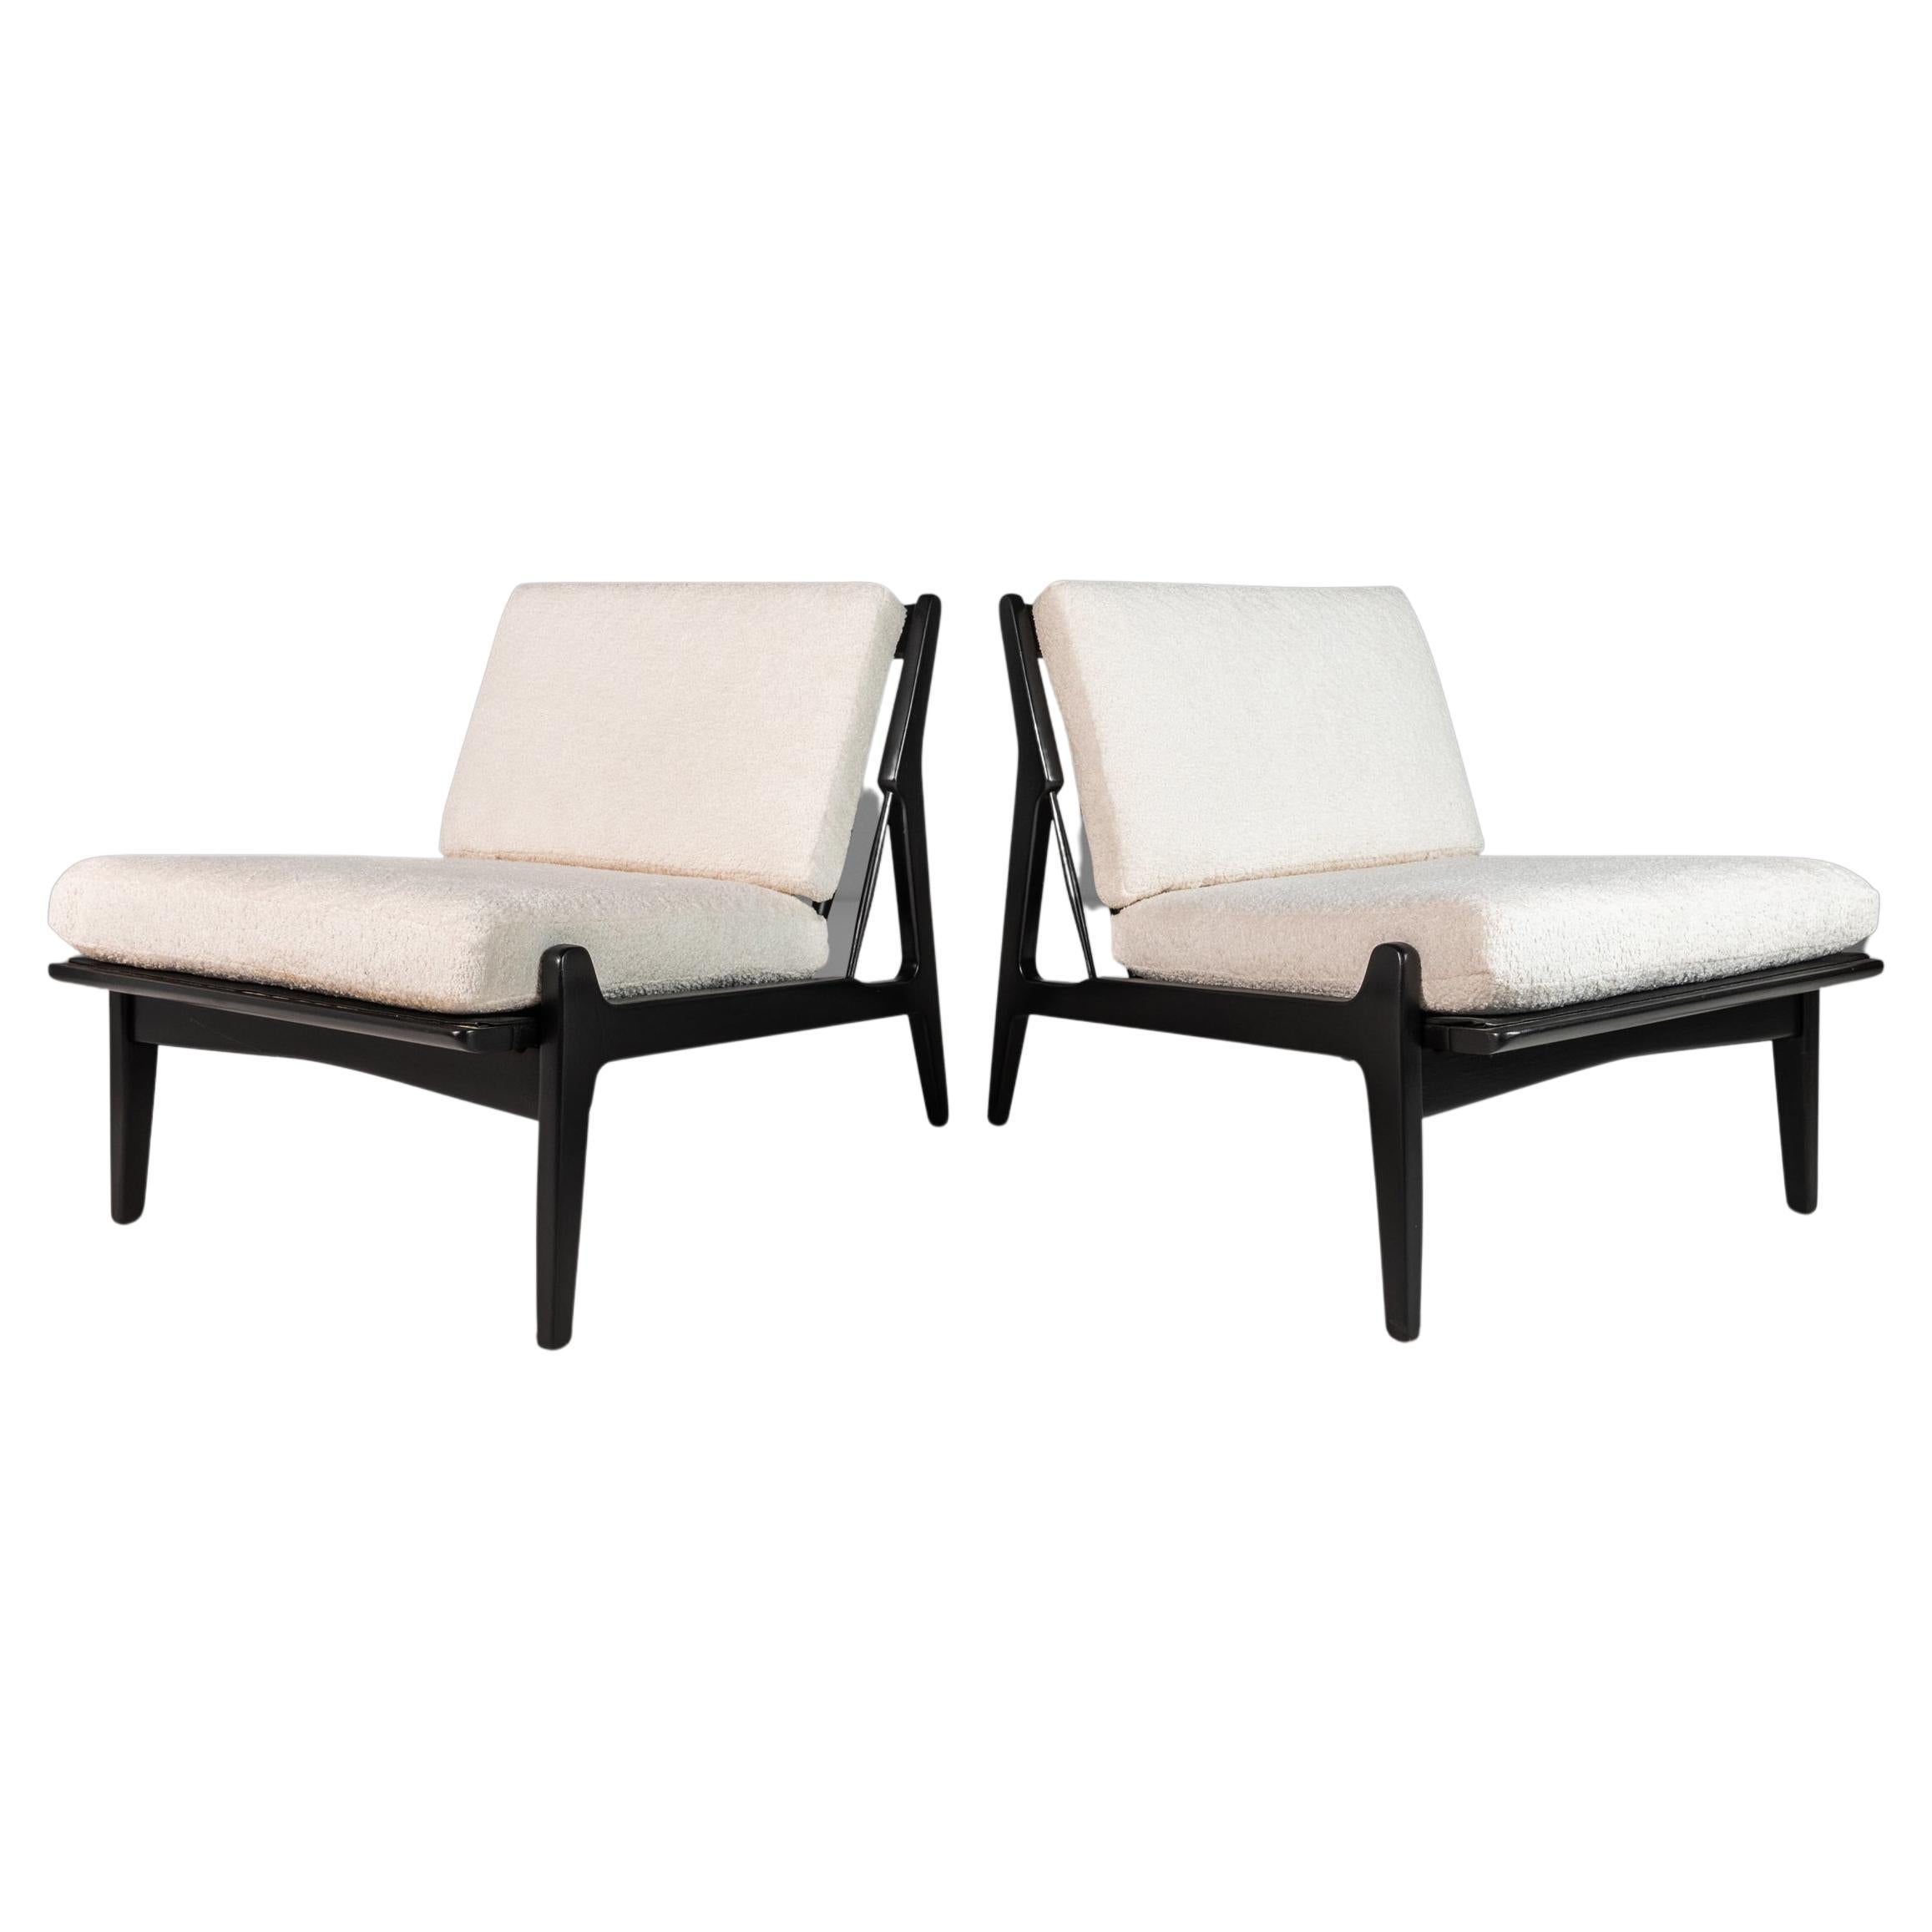 Set of Two Ebonized Lounge Chairs in Bouclé by Ib Kofod Larsen for Selig, 1950s For Sale